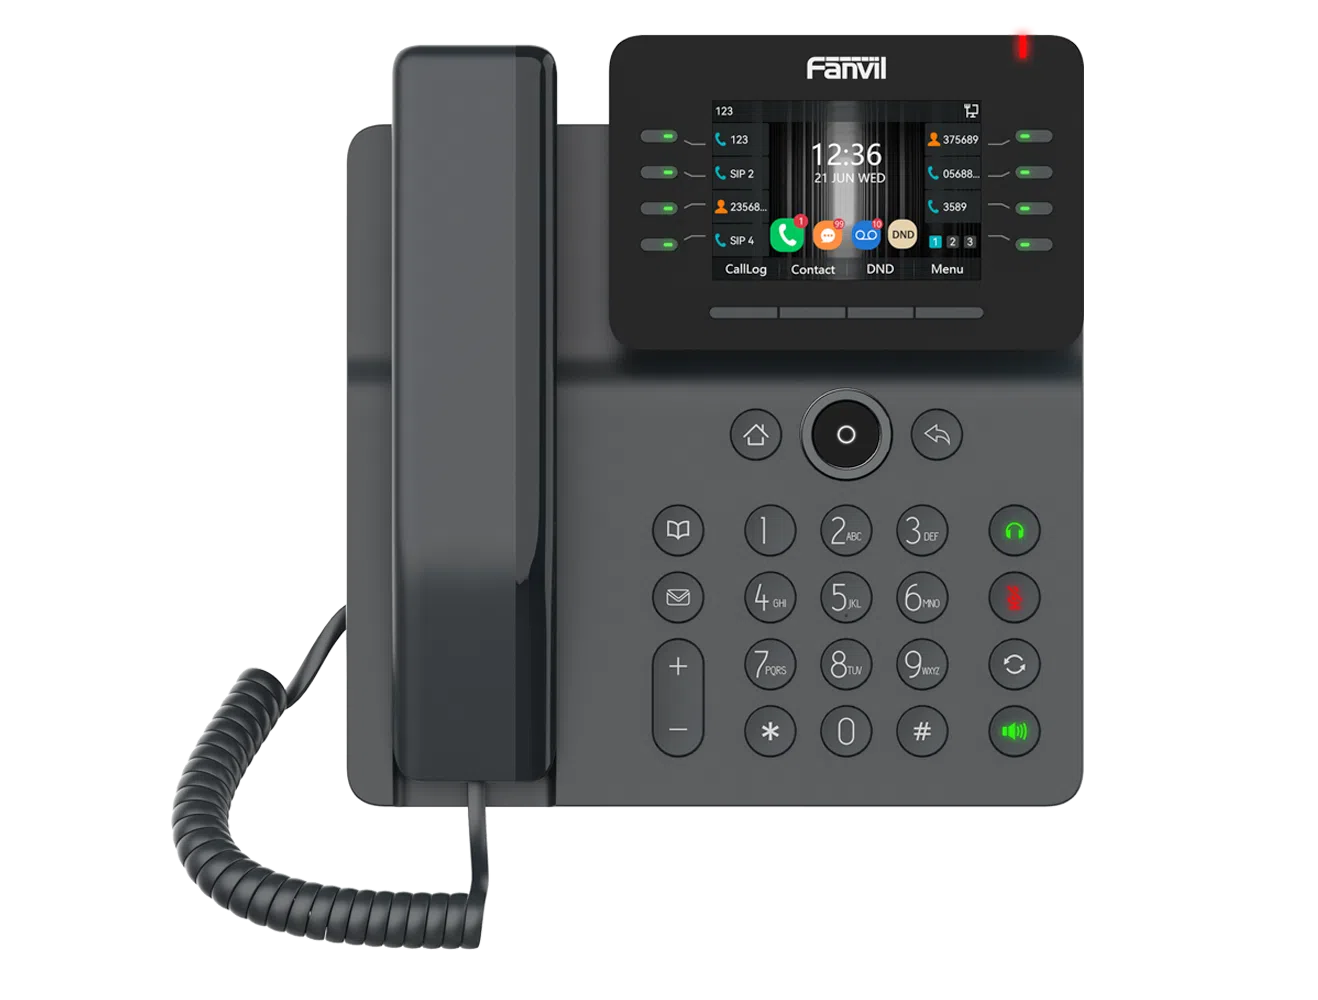 Is the Fanvil V64 Enterprise Phone equipped with Gigabit ports?